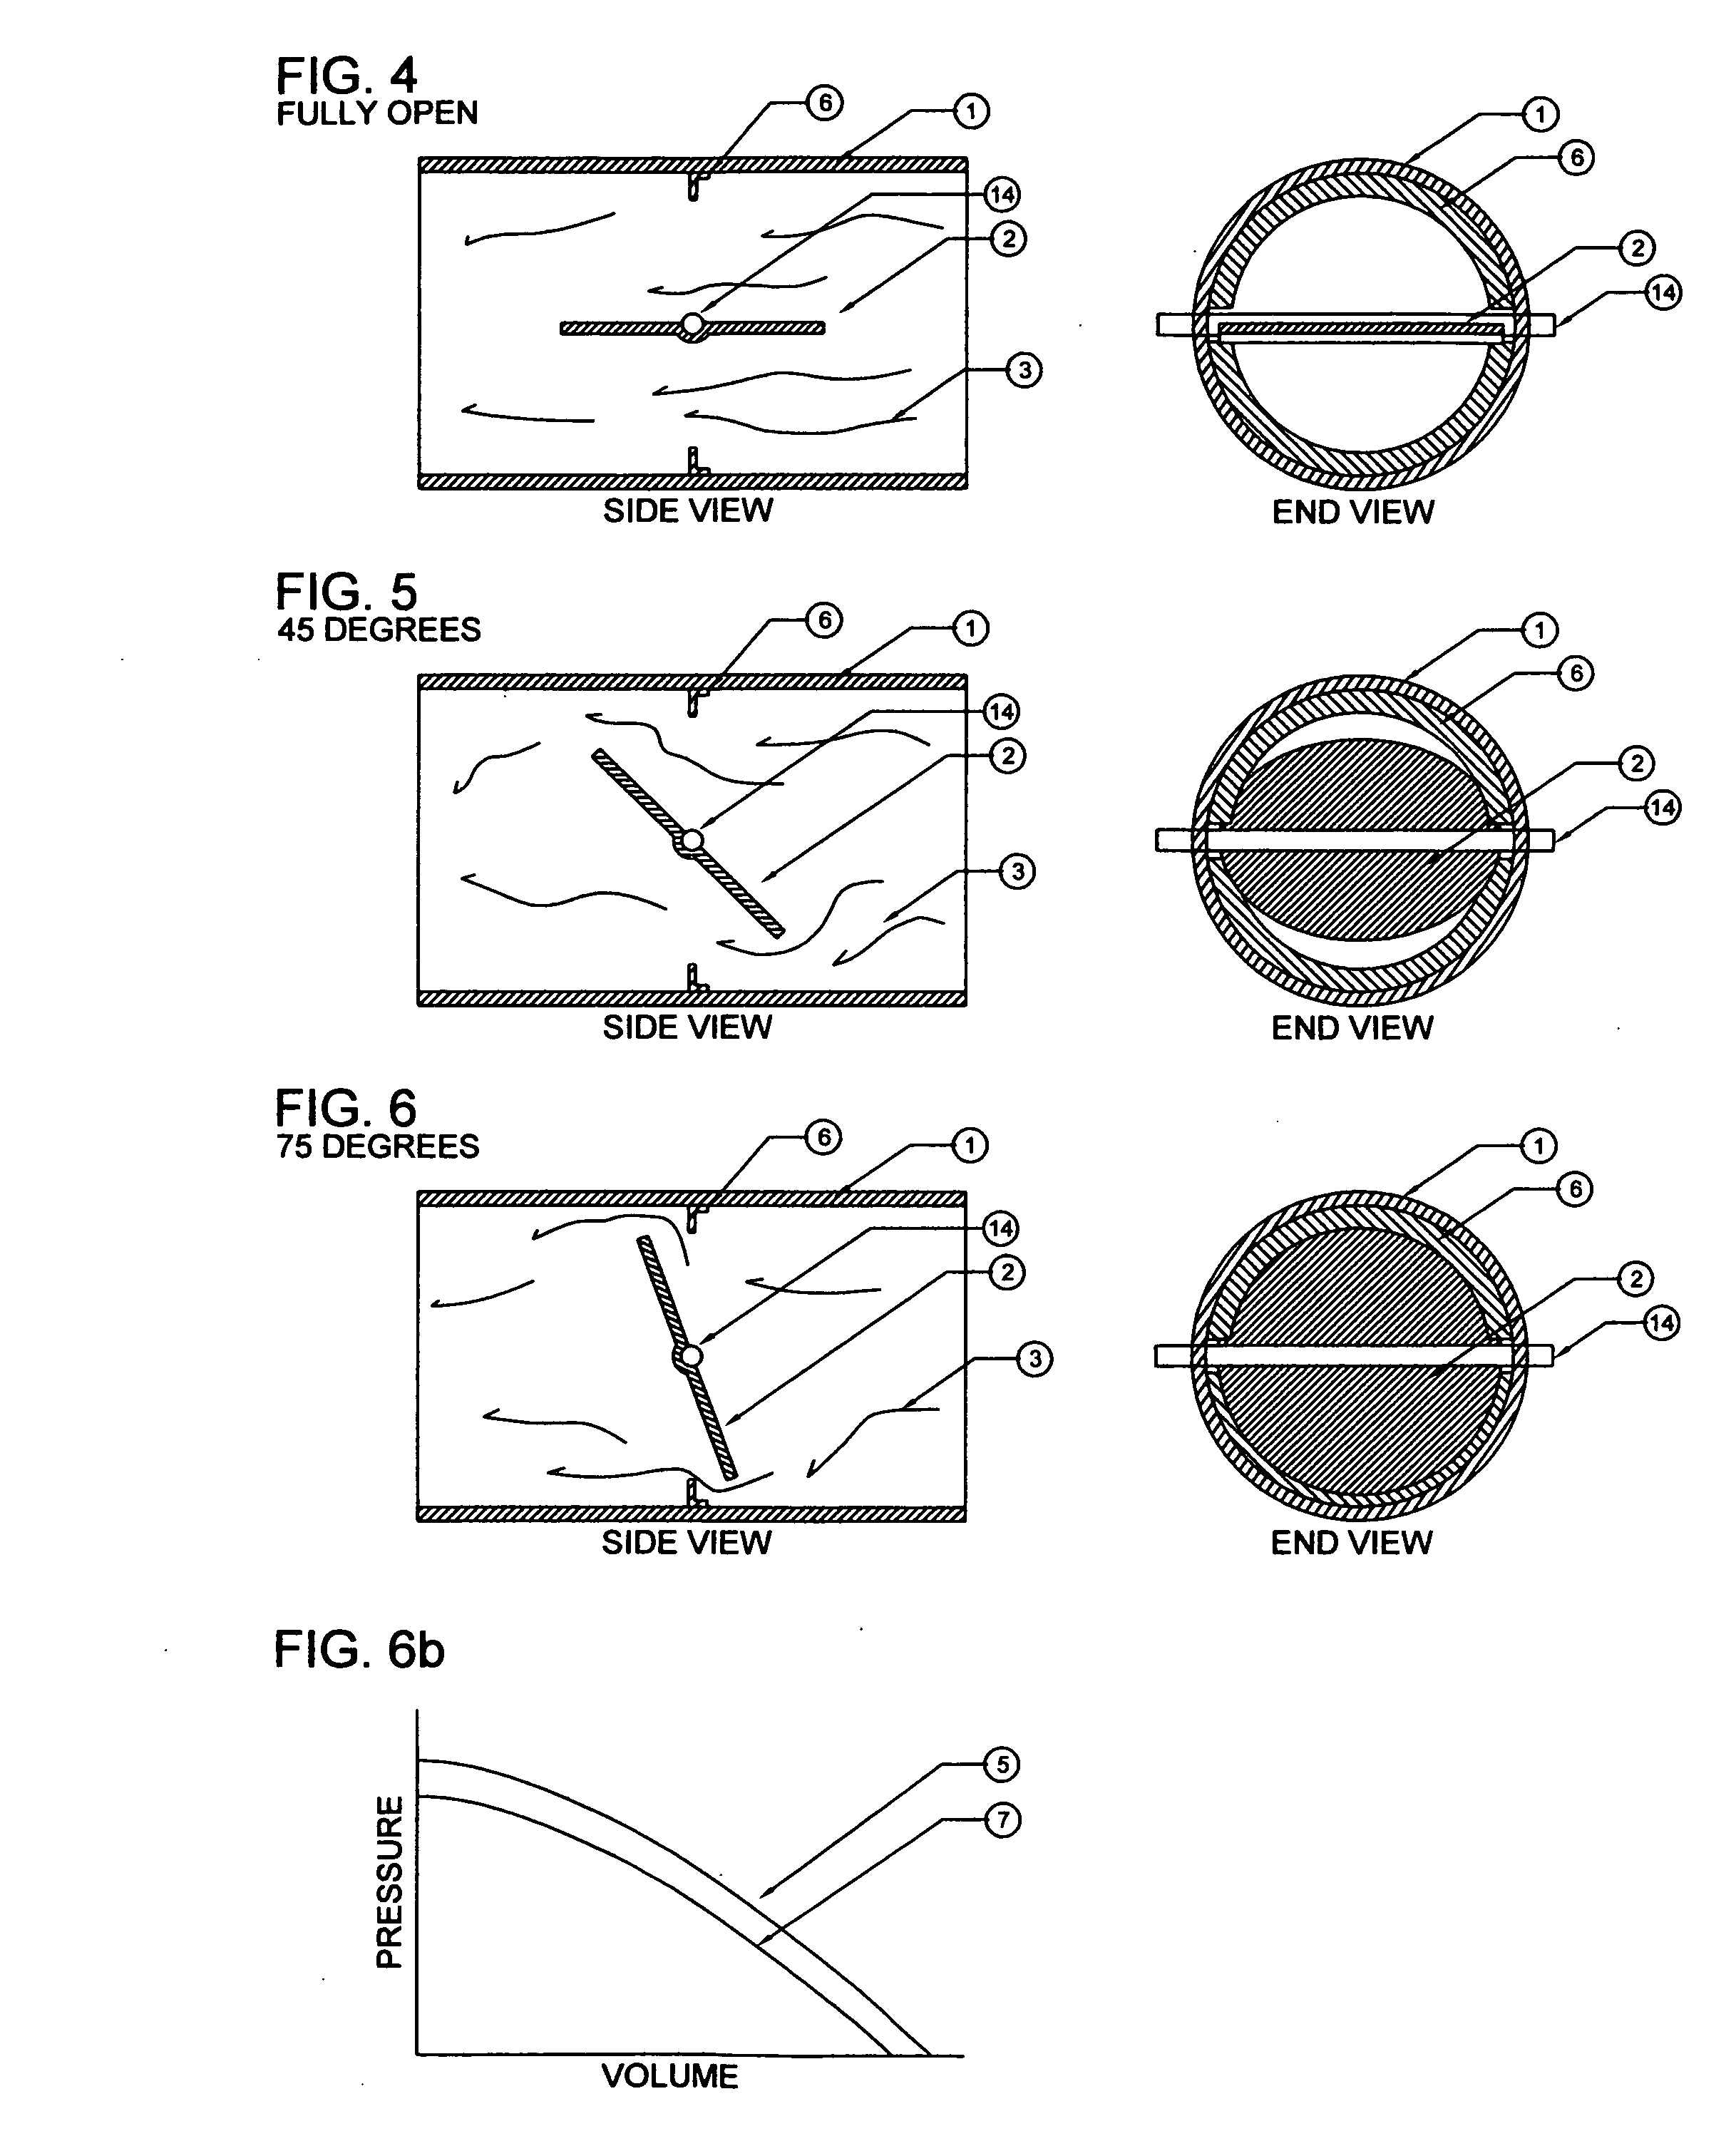 Air flow control damper with linear performance characteristics comprising an air foil control blade and inner annular orifice